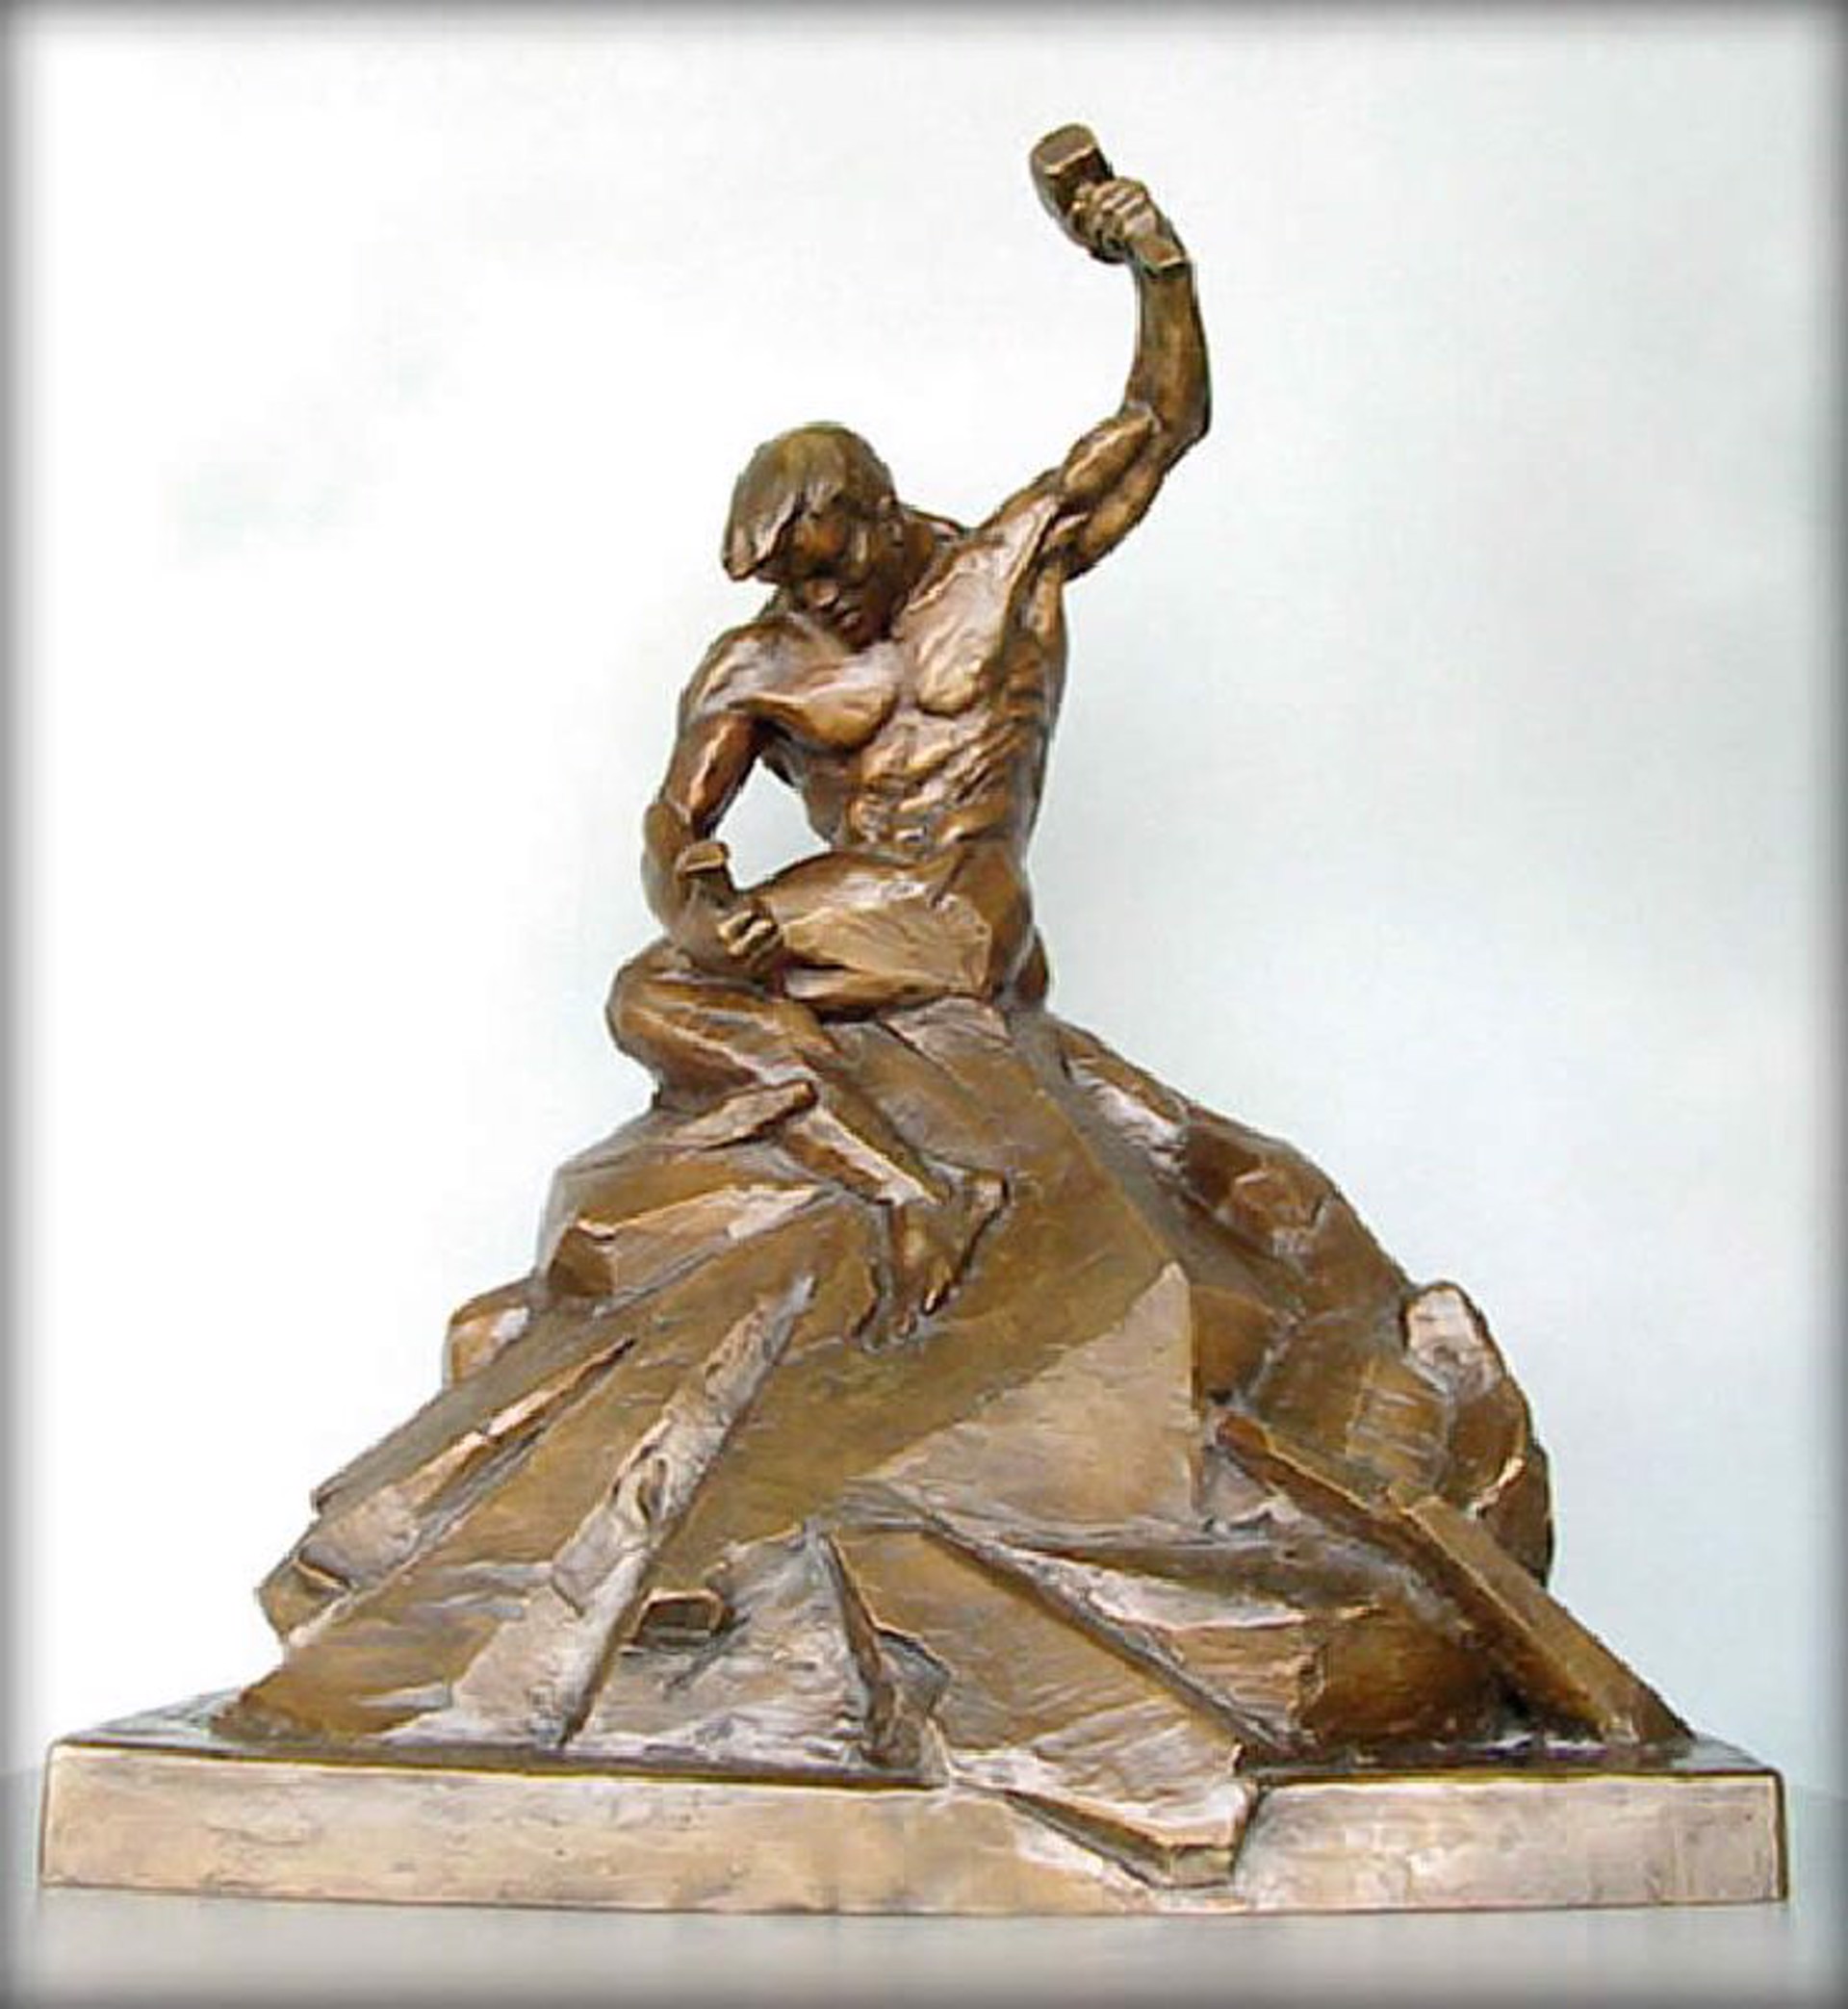 The Sculptor by Gary Lee Price (sculptor)